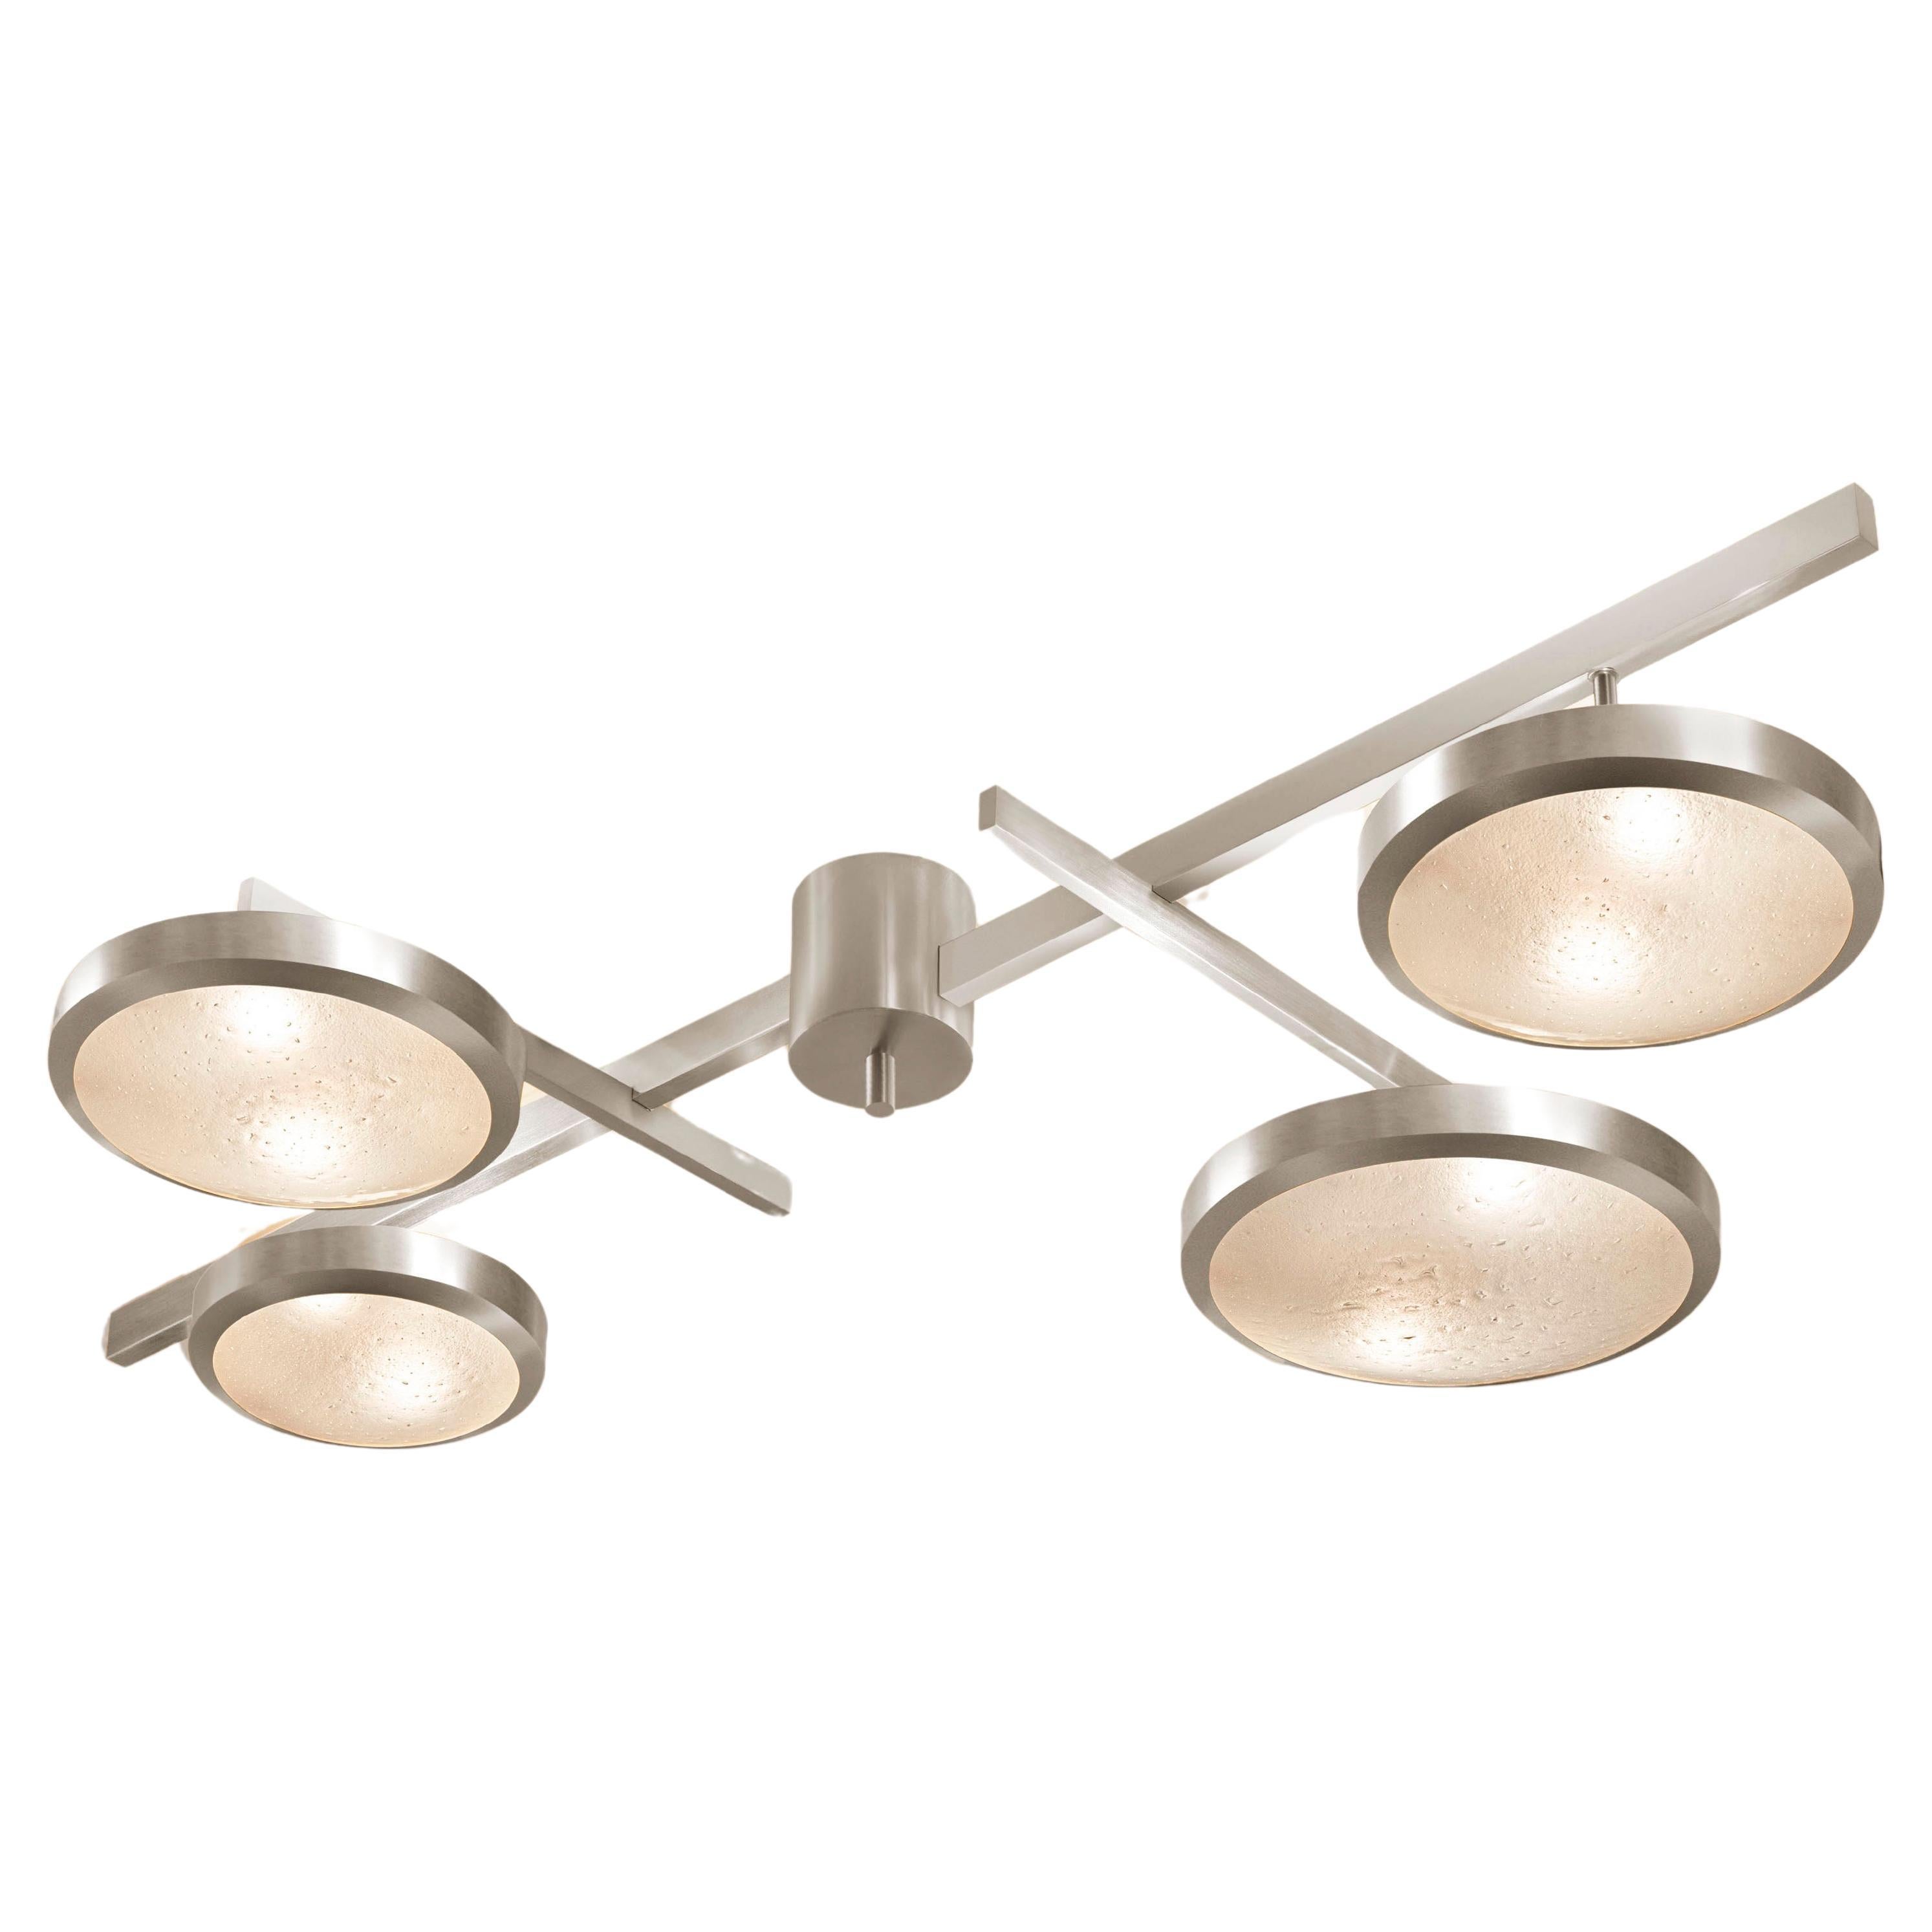 Tetrix Ceiling Light by Gaspare Asaro - Satin Nickel Finish For Sale